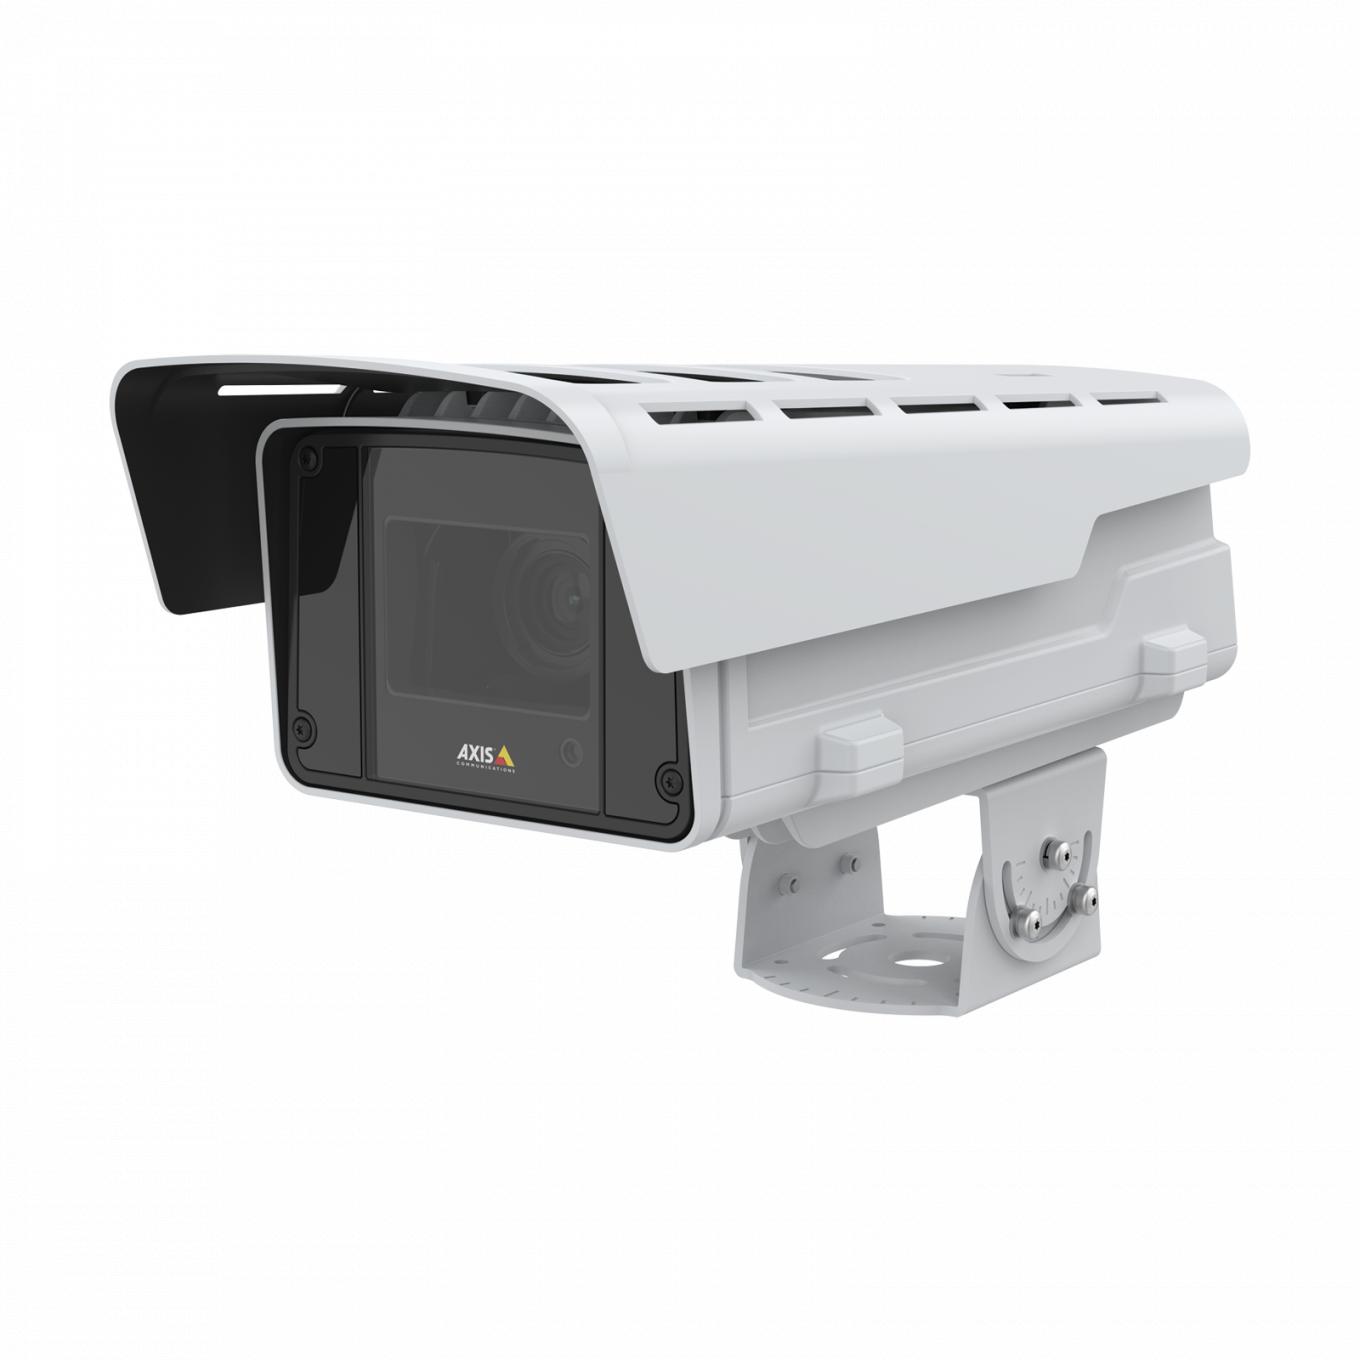 AXIS TQ1501-E Crane and Traffic MountおよびAXIS Q1615-LE MkIII Network Camera